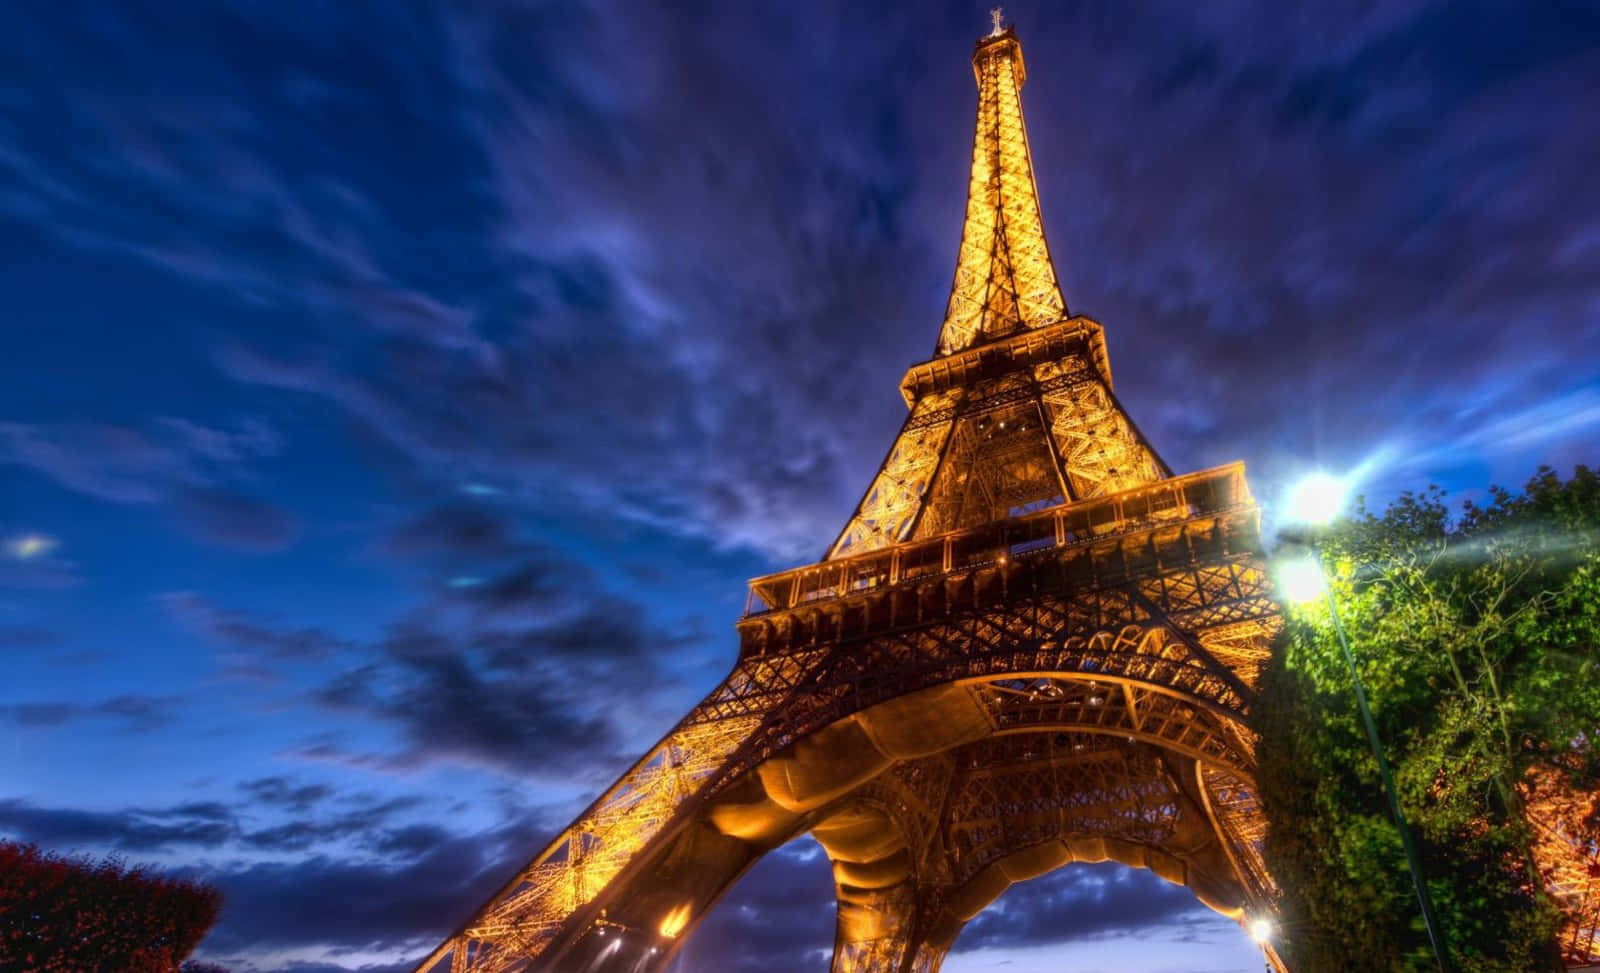 The Eiffel Tower Is Lit Up At Night